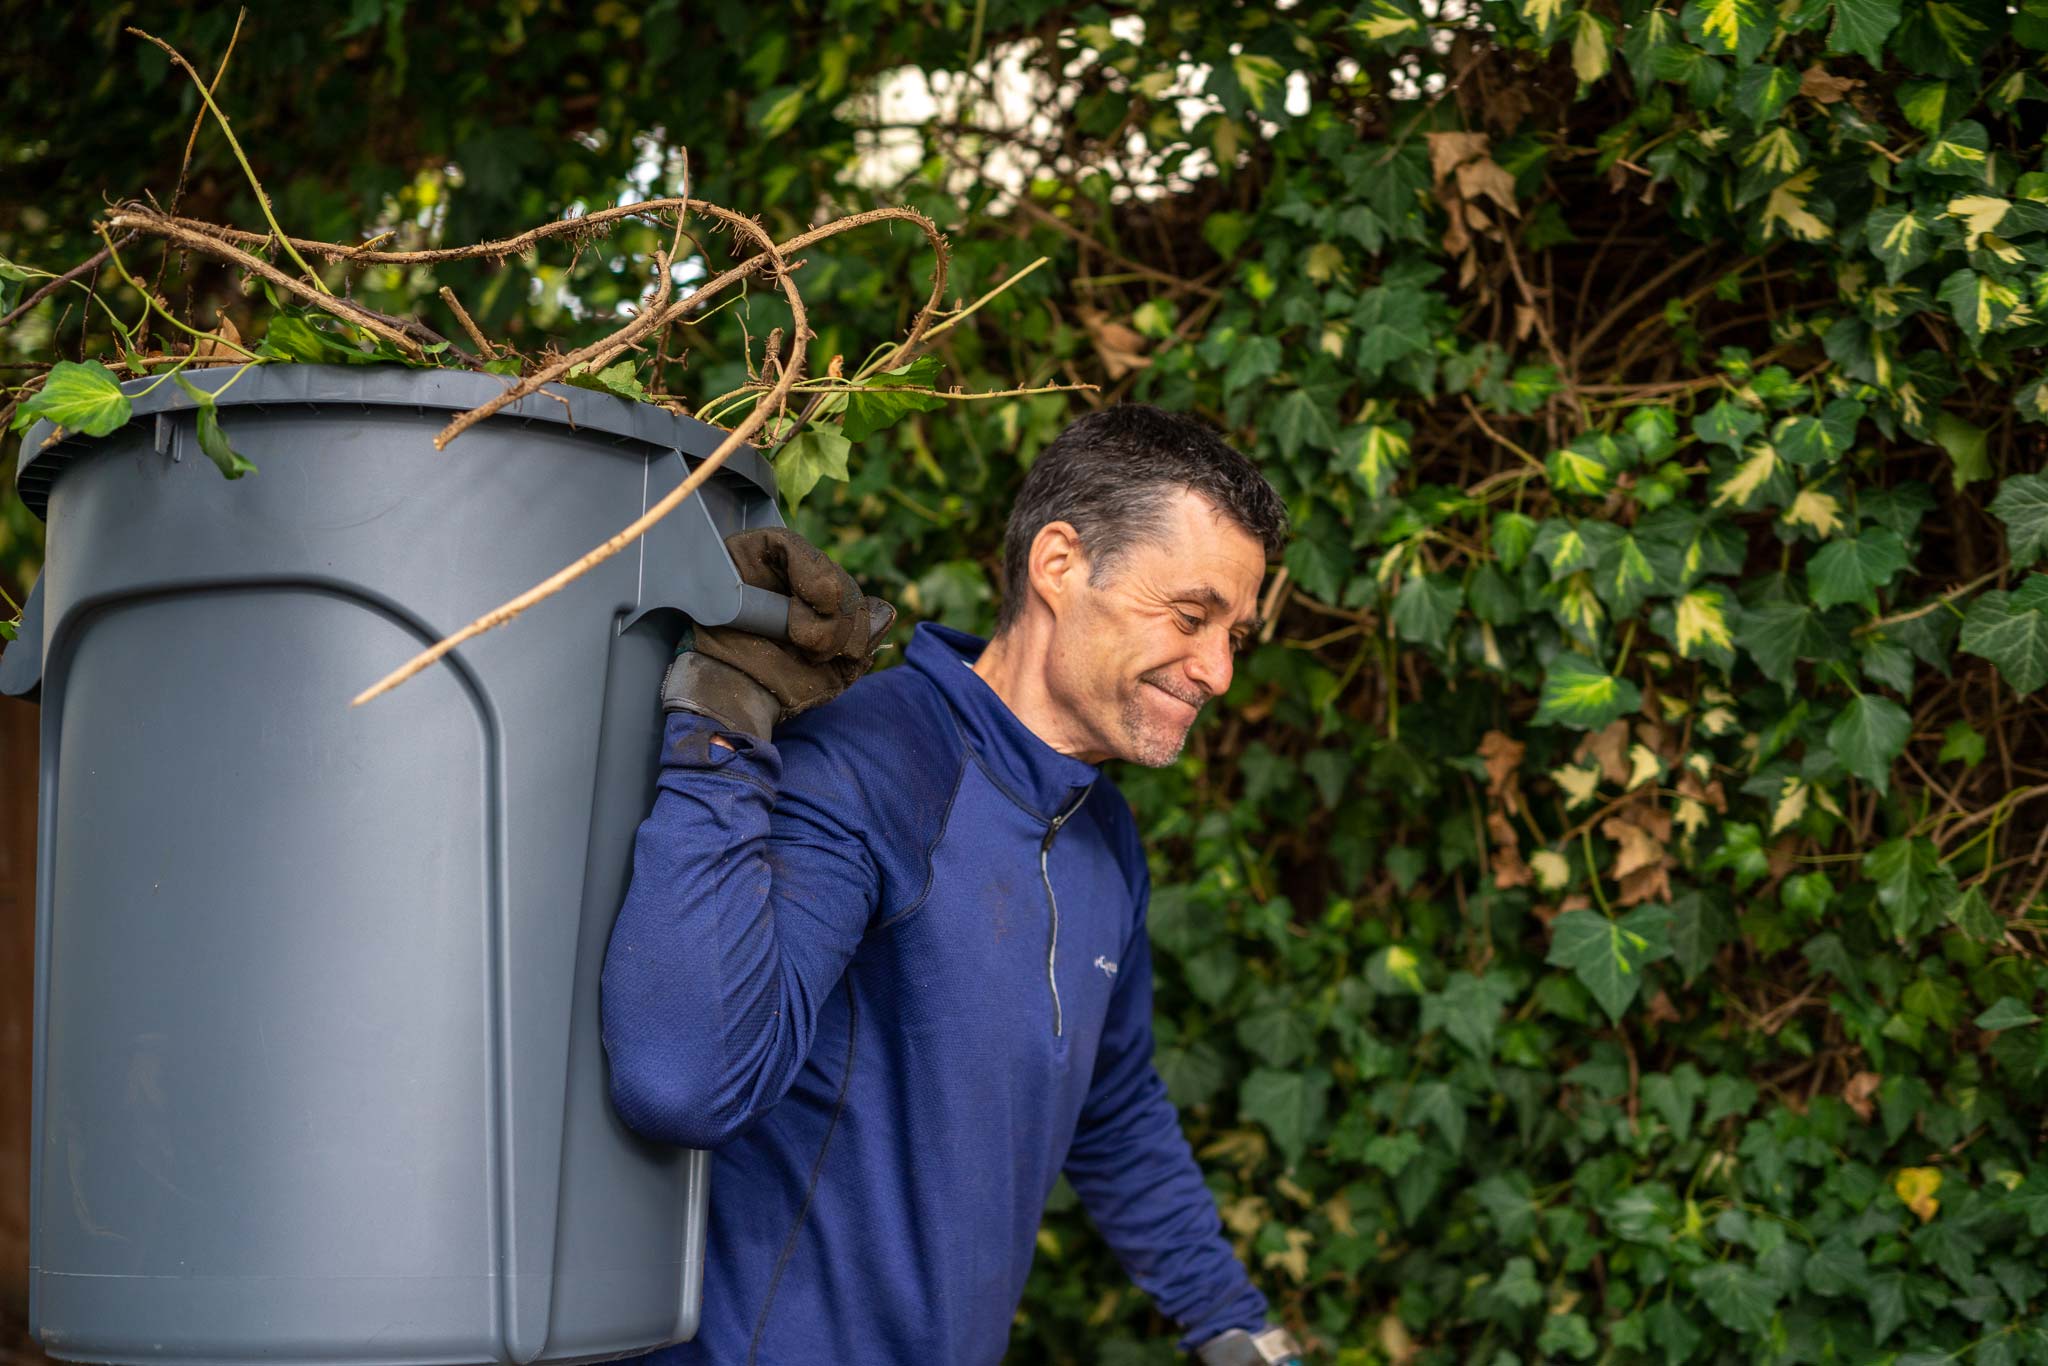 a smiling man wearing gloves holding a full trashcan of vines while moving left to right